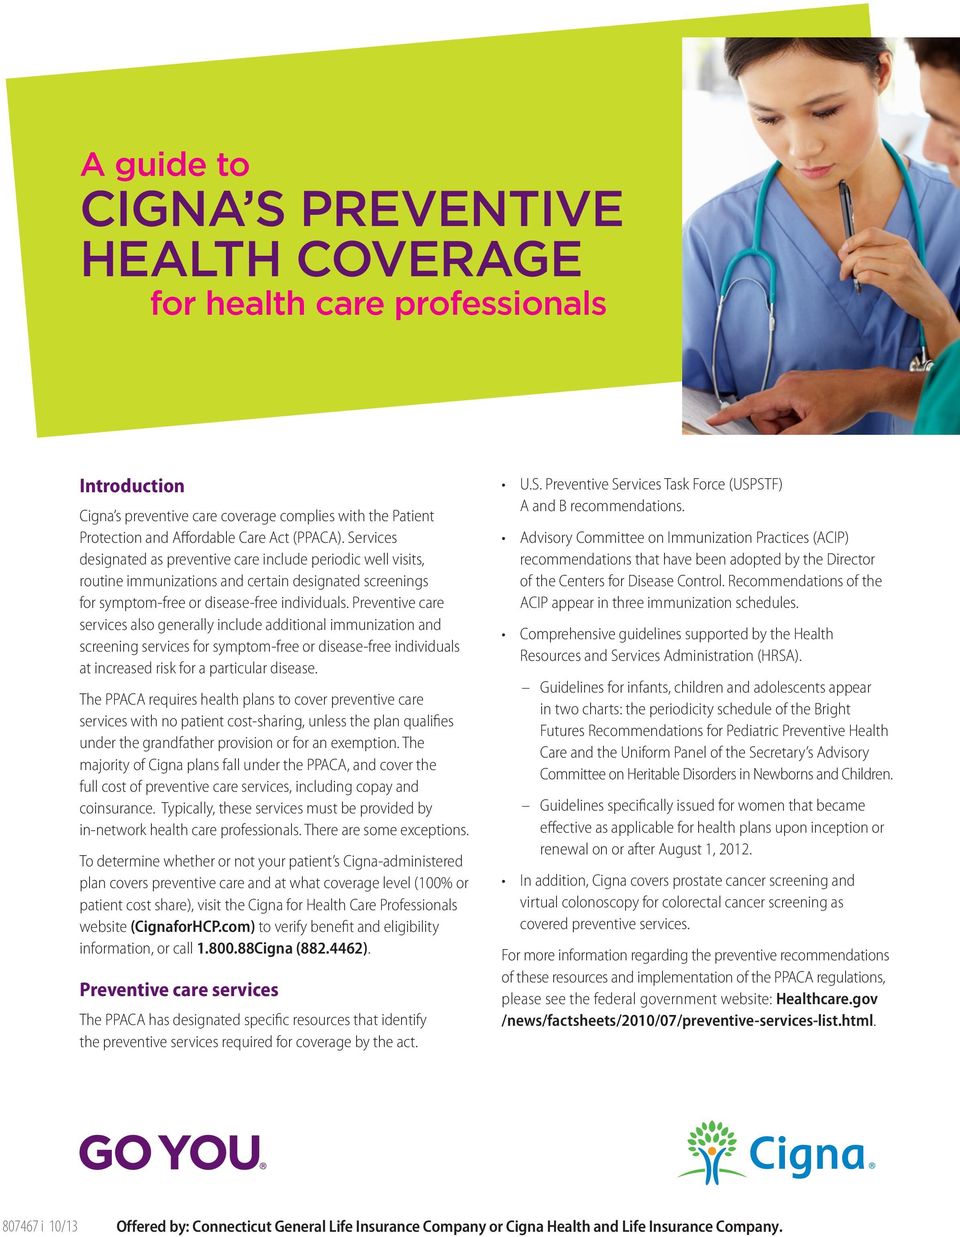 Preventive care services also generally include additional immunization and screening services for symptom-free or disease-free individuals at increased risk for a particular disease.